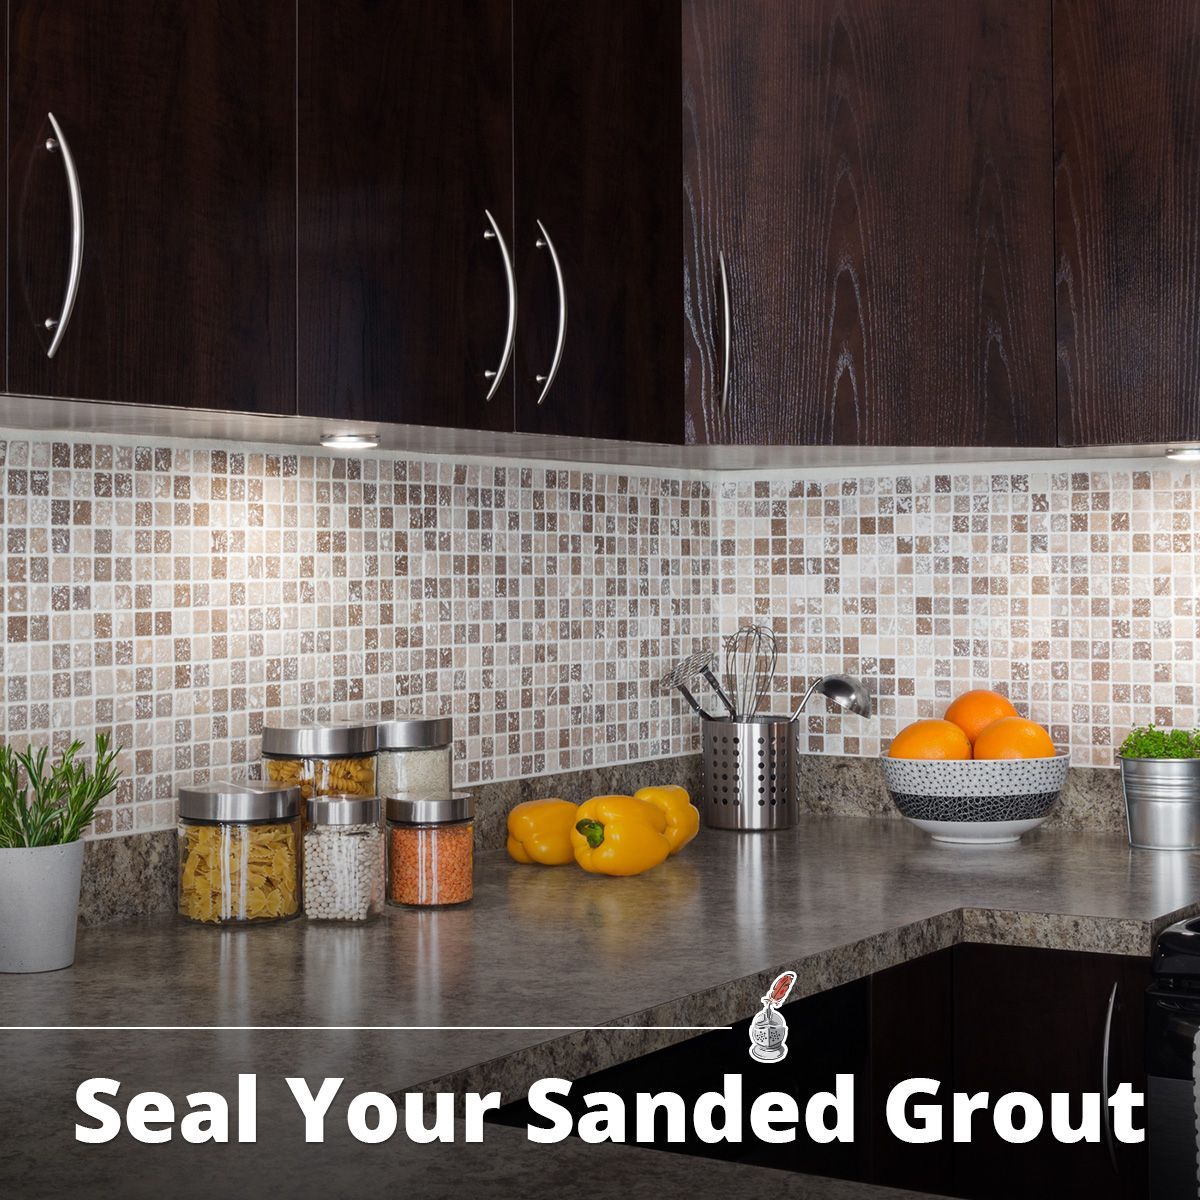 Seal Your Sanded Grout